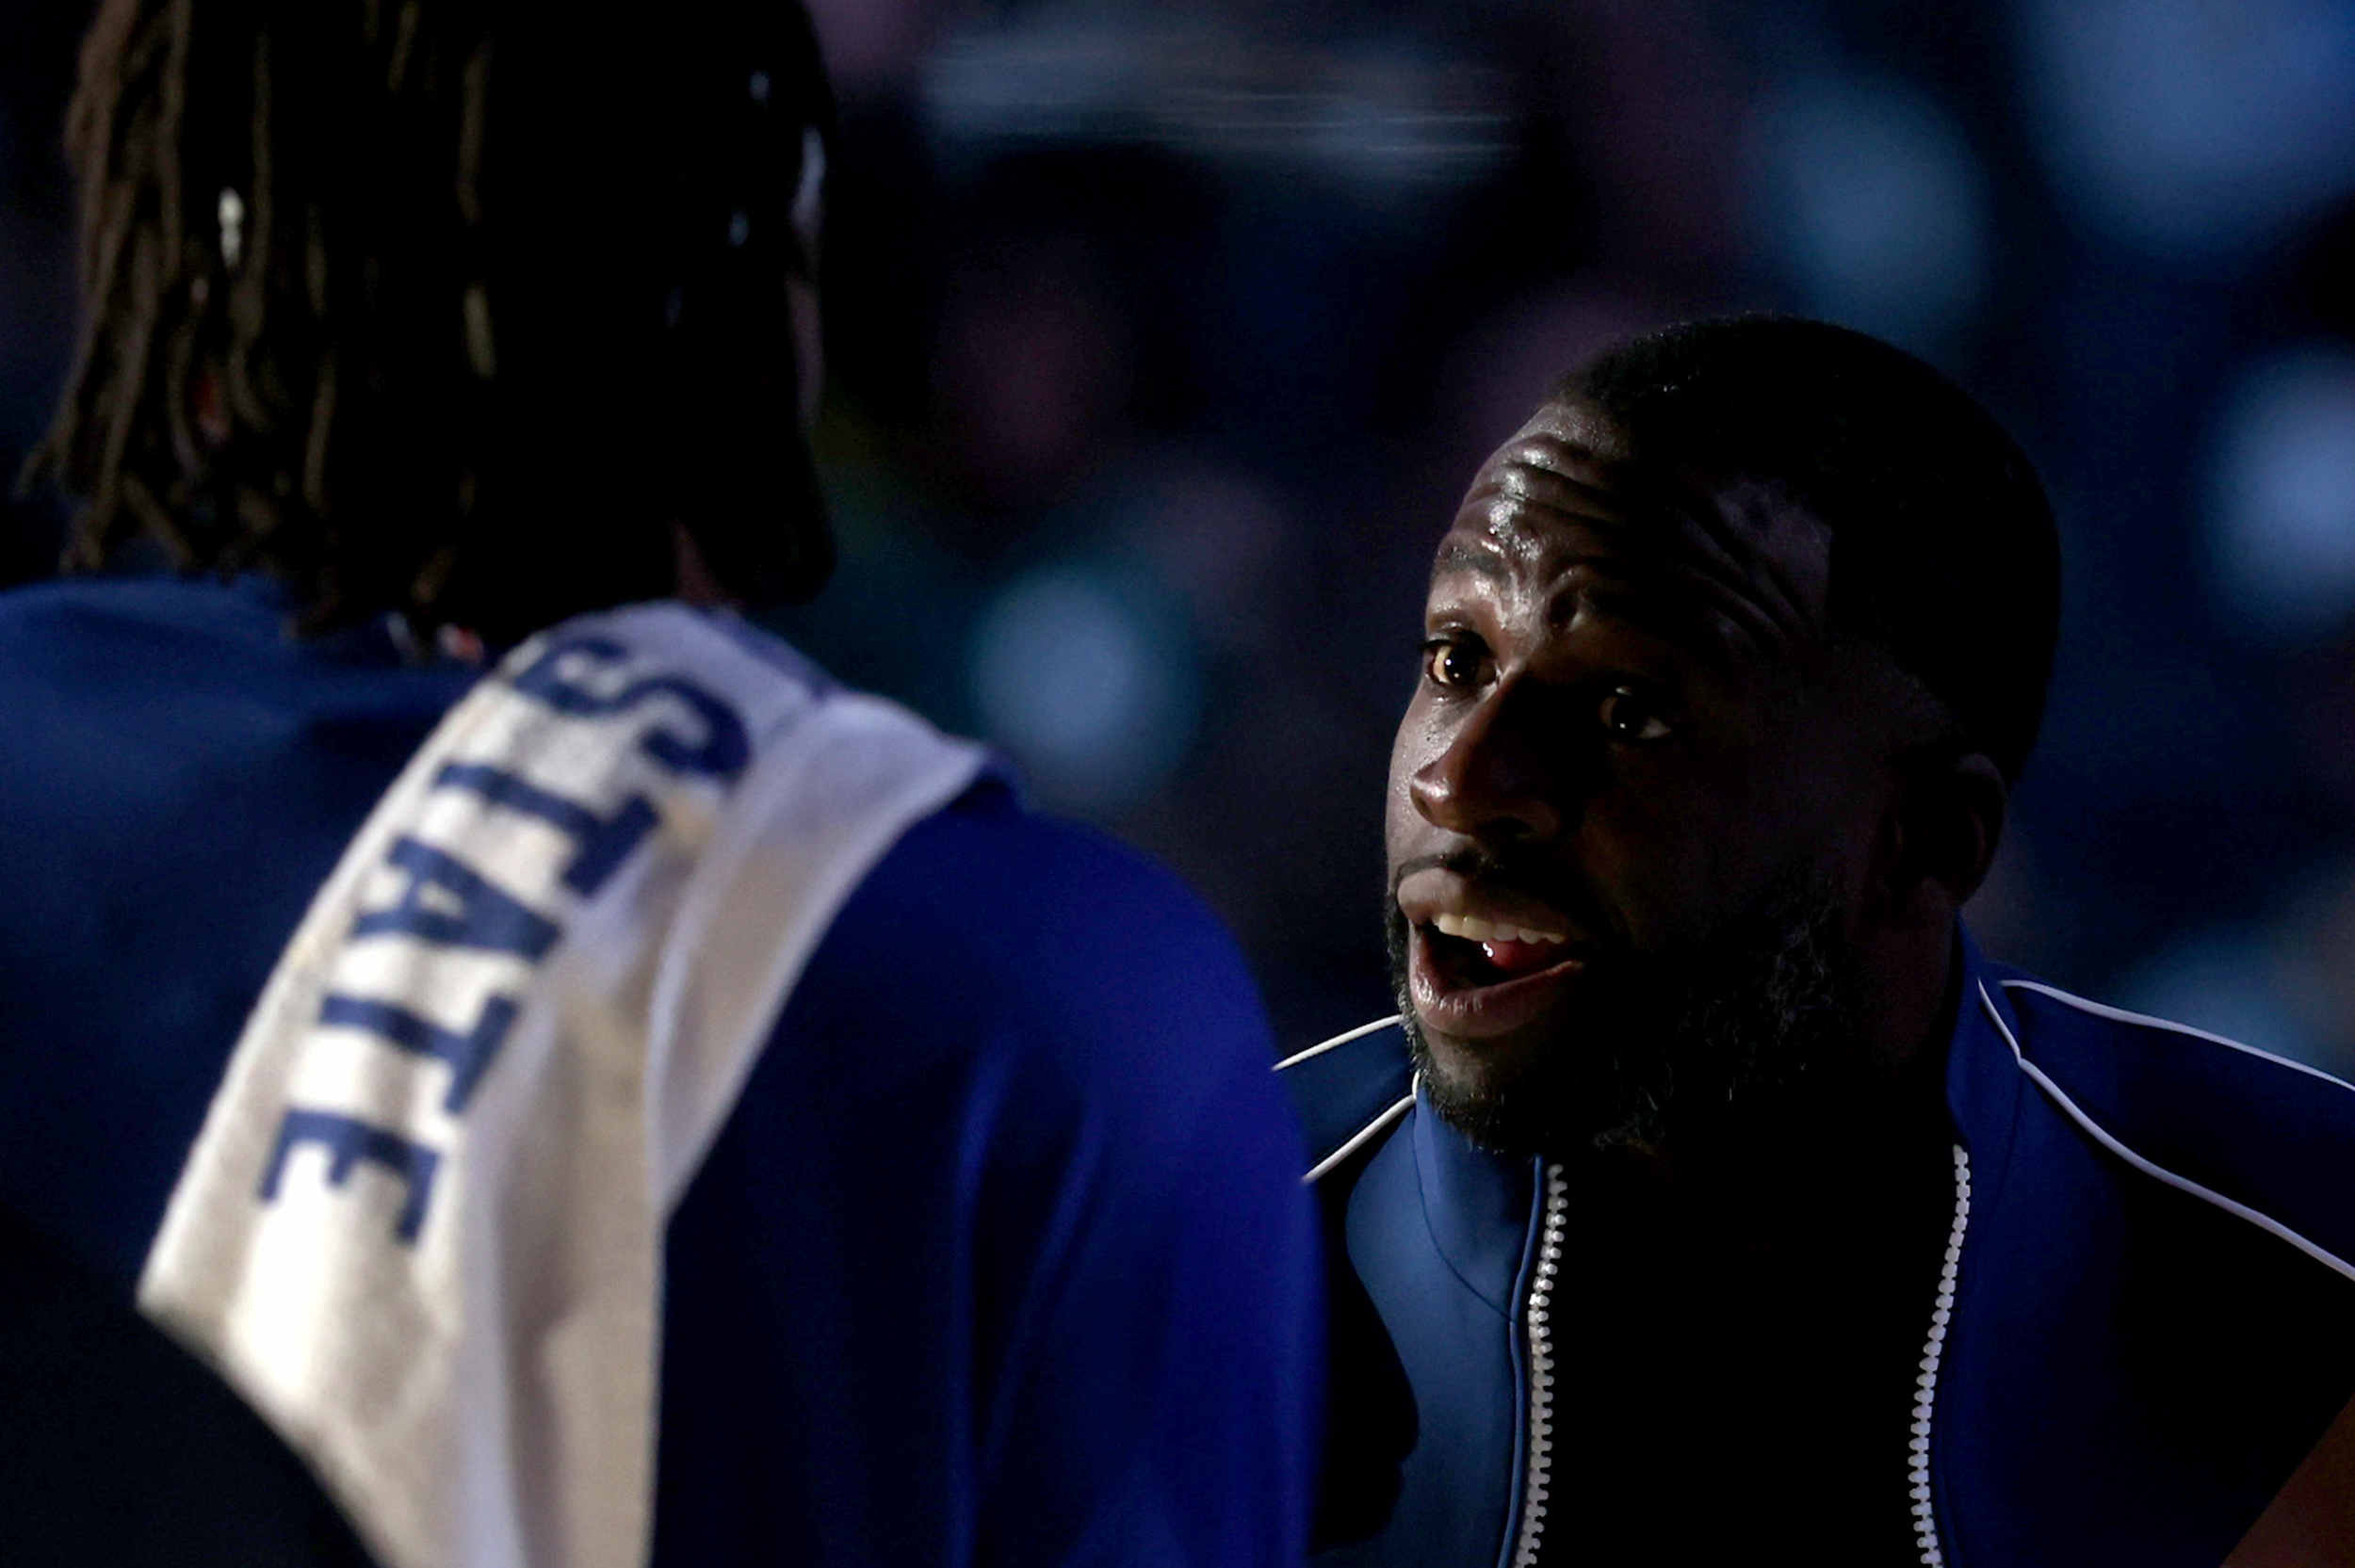 Draymond Green talks to a teammate during a timeout.